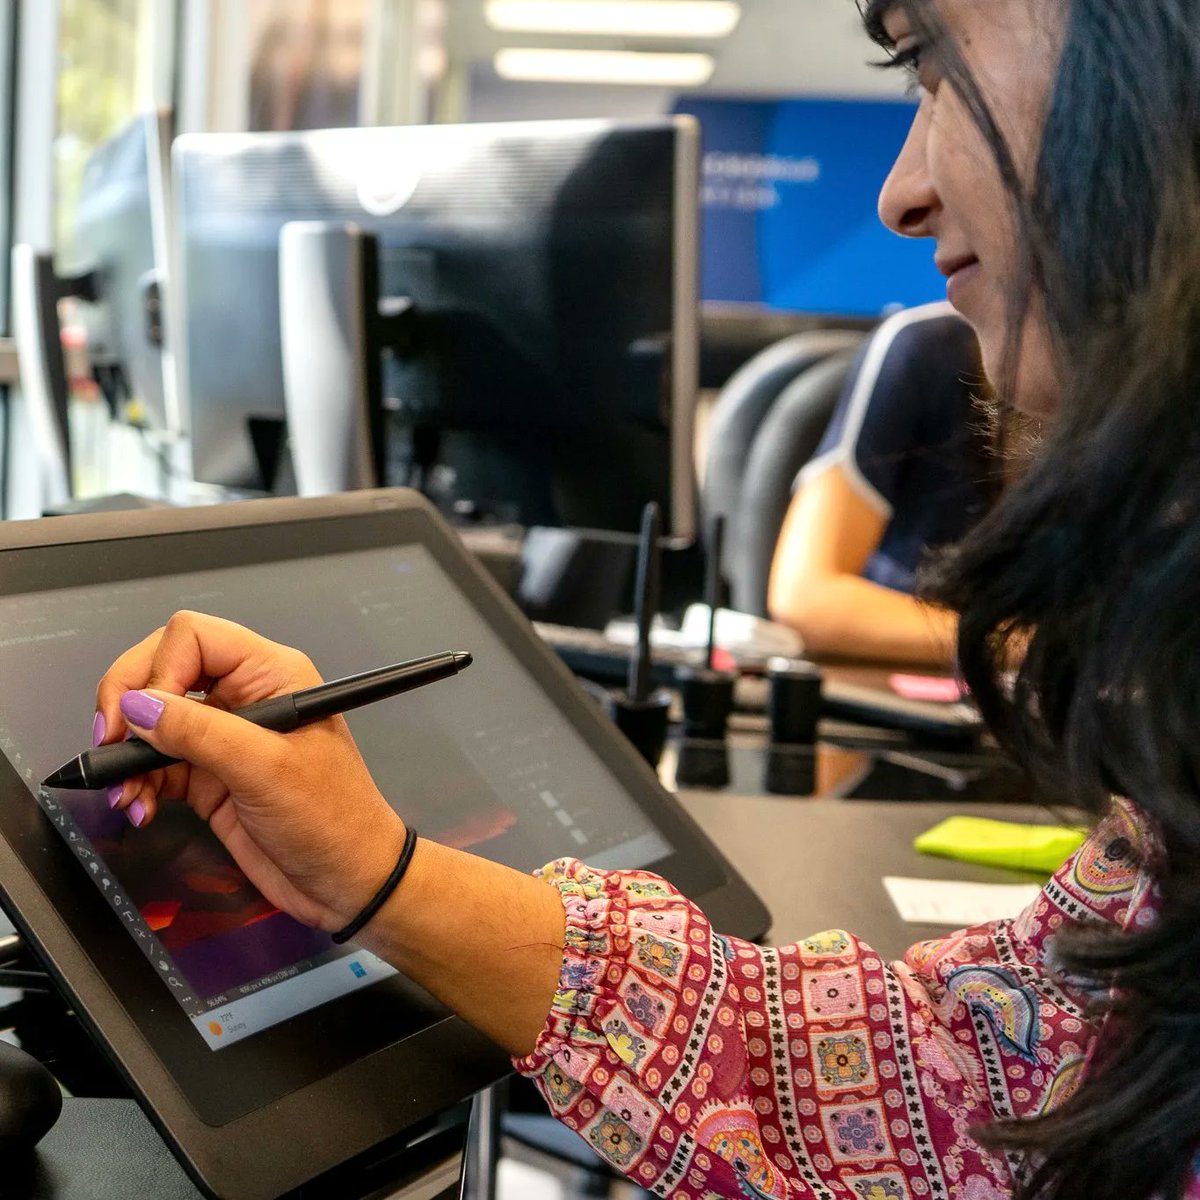 @Wacom Cintiqs enable our student interns from all disciplines to utilize their individual talents. Thank you, Wacom, for supplying tech for efficiency and enhancing the beauty of our work. 🖊 

#WacomforEducation #WacomEDU @wacomedu